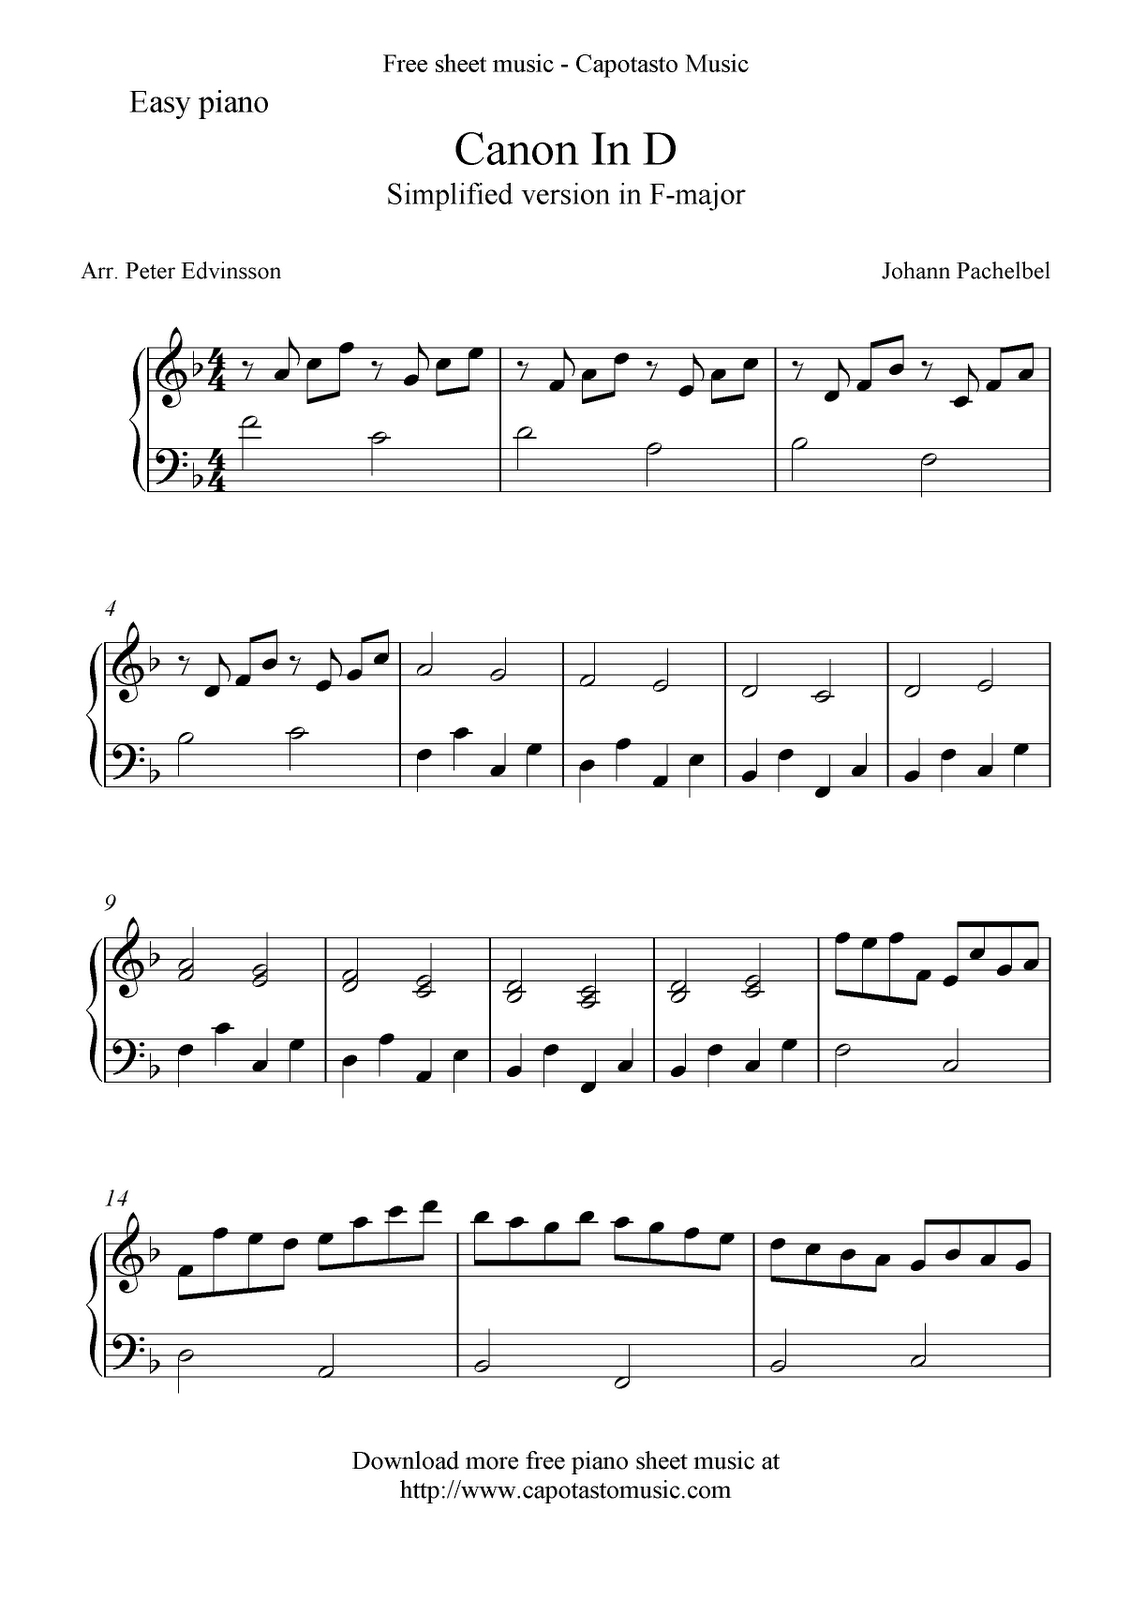 Canon In D Free Easy Piano Sheet Music--&amp;gt; Not Complete Wish I - Canon In D Piano Sheet Music Free Printable